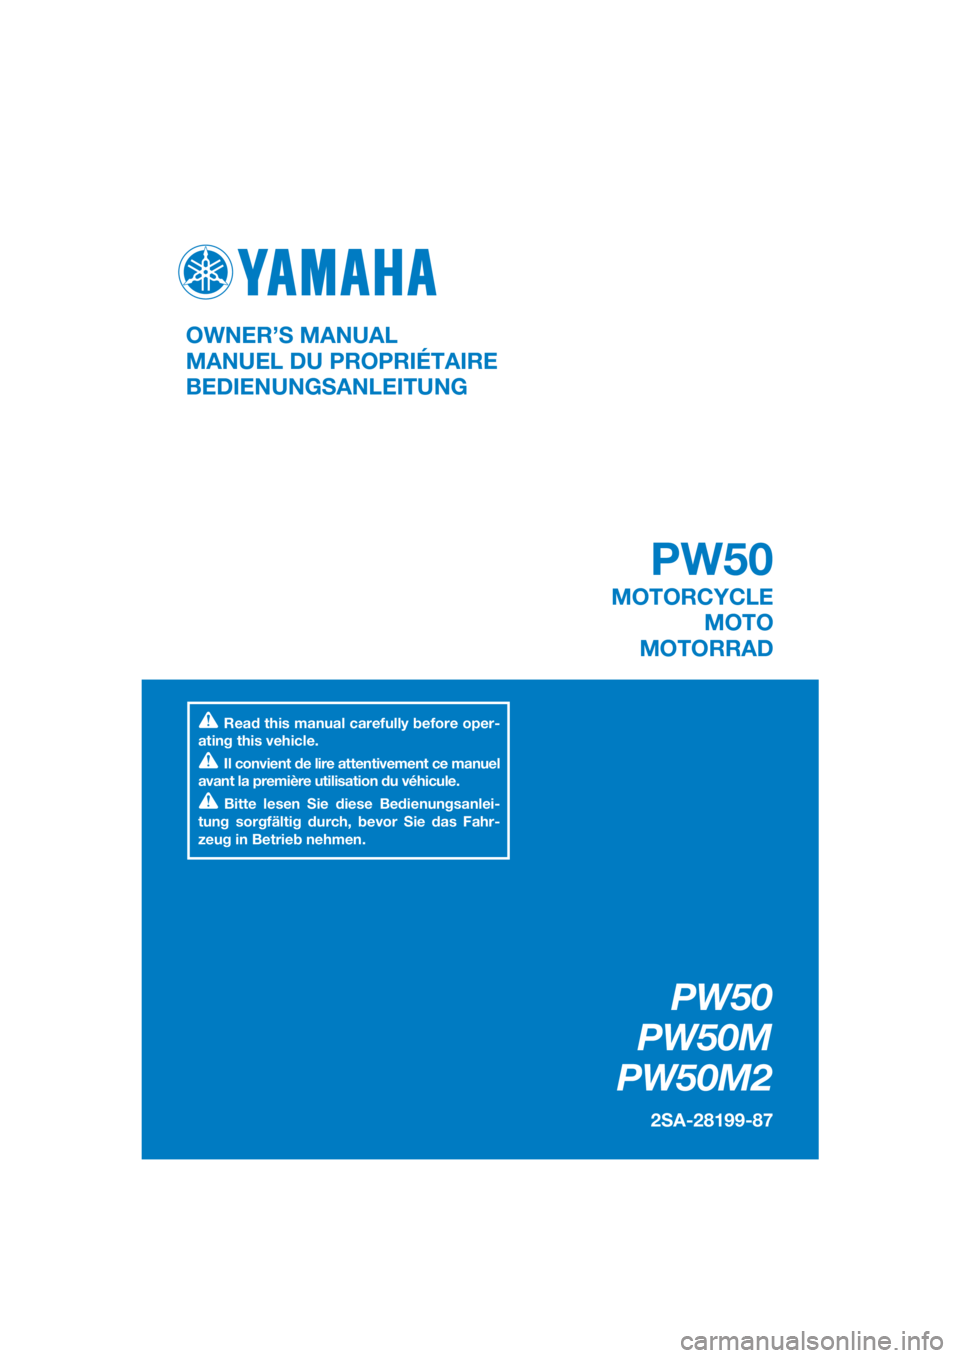 YAMAHA PW50 2021  Owners Manual DIC183
PW50
PW50M
PW50M2
2SA-28199-87
OWNER’S MANUAL
MANUEL DU PROPRIÉTAIRE
BEDIENUNGSANLEITUNG
Read this manual carefully before oper-
ating this vehicle.
Il convient de lire attentivement ce manu